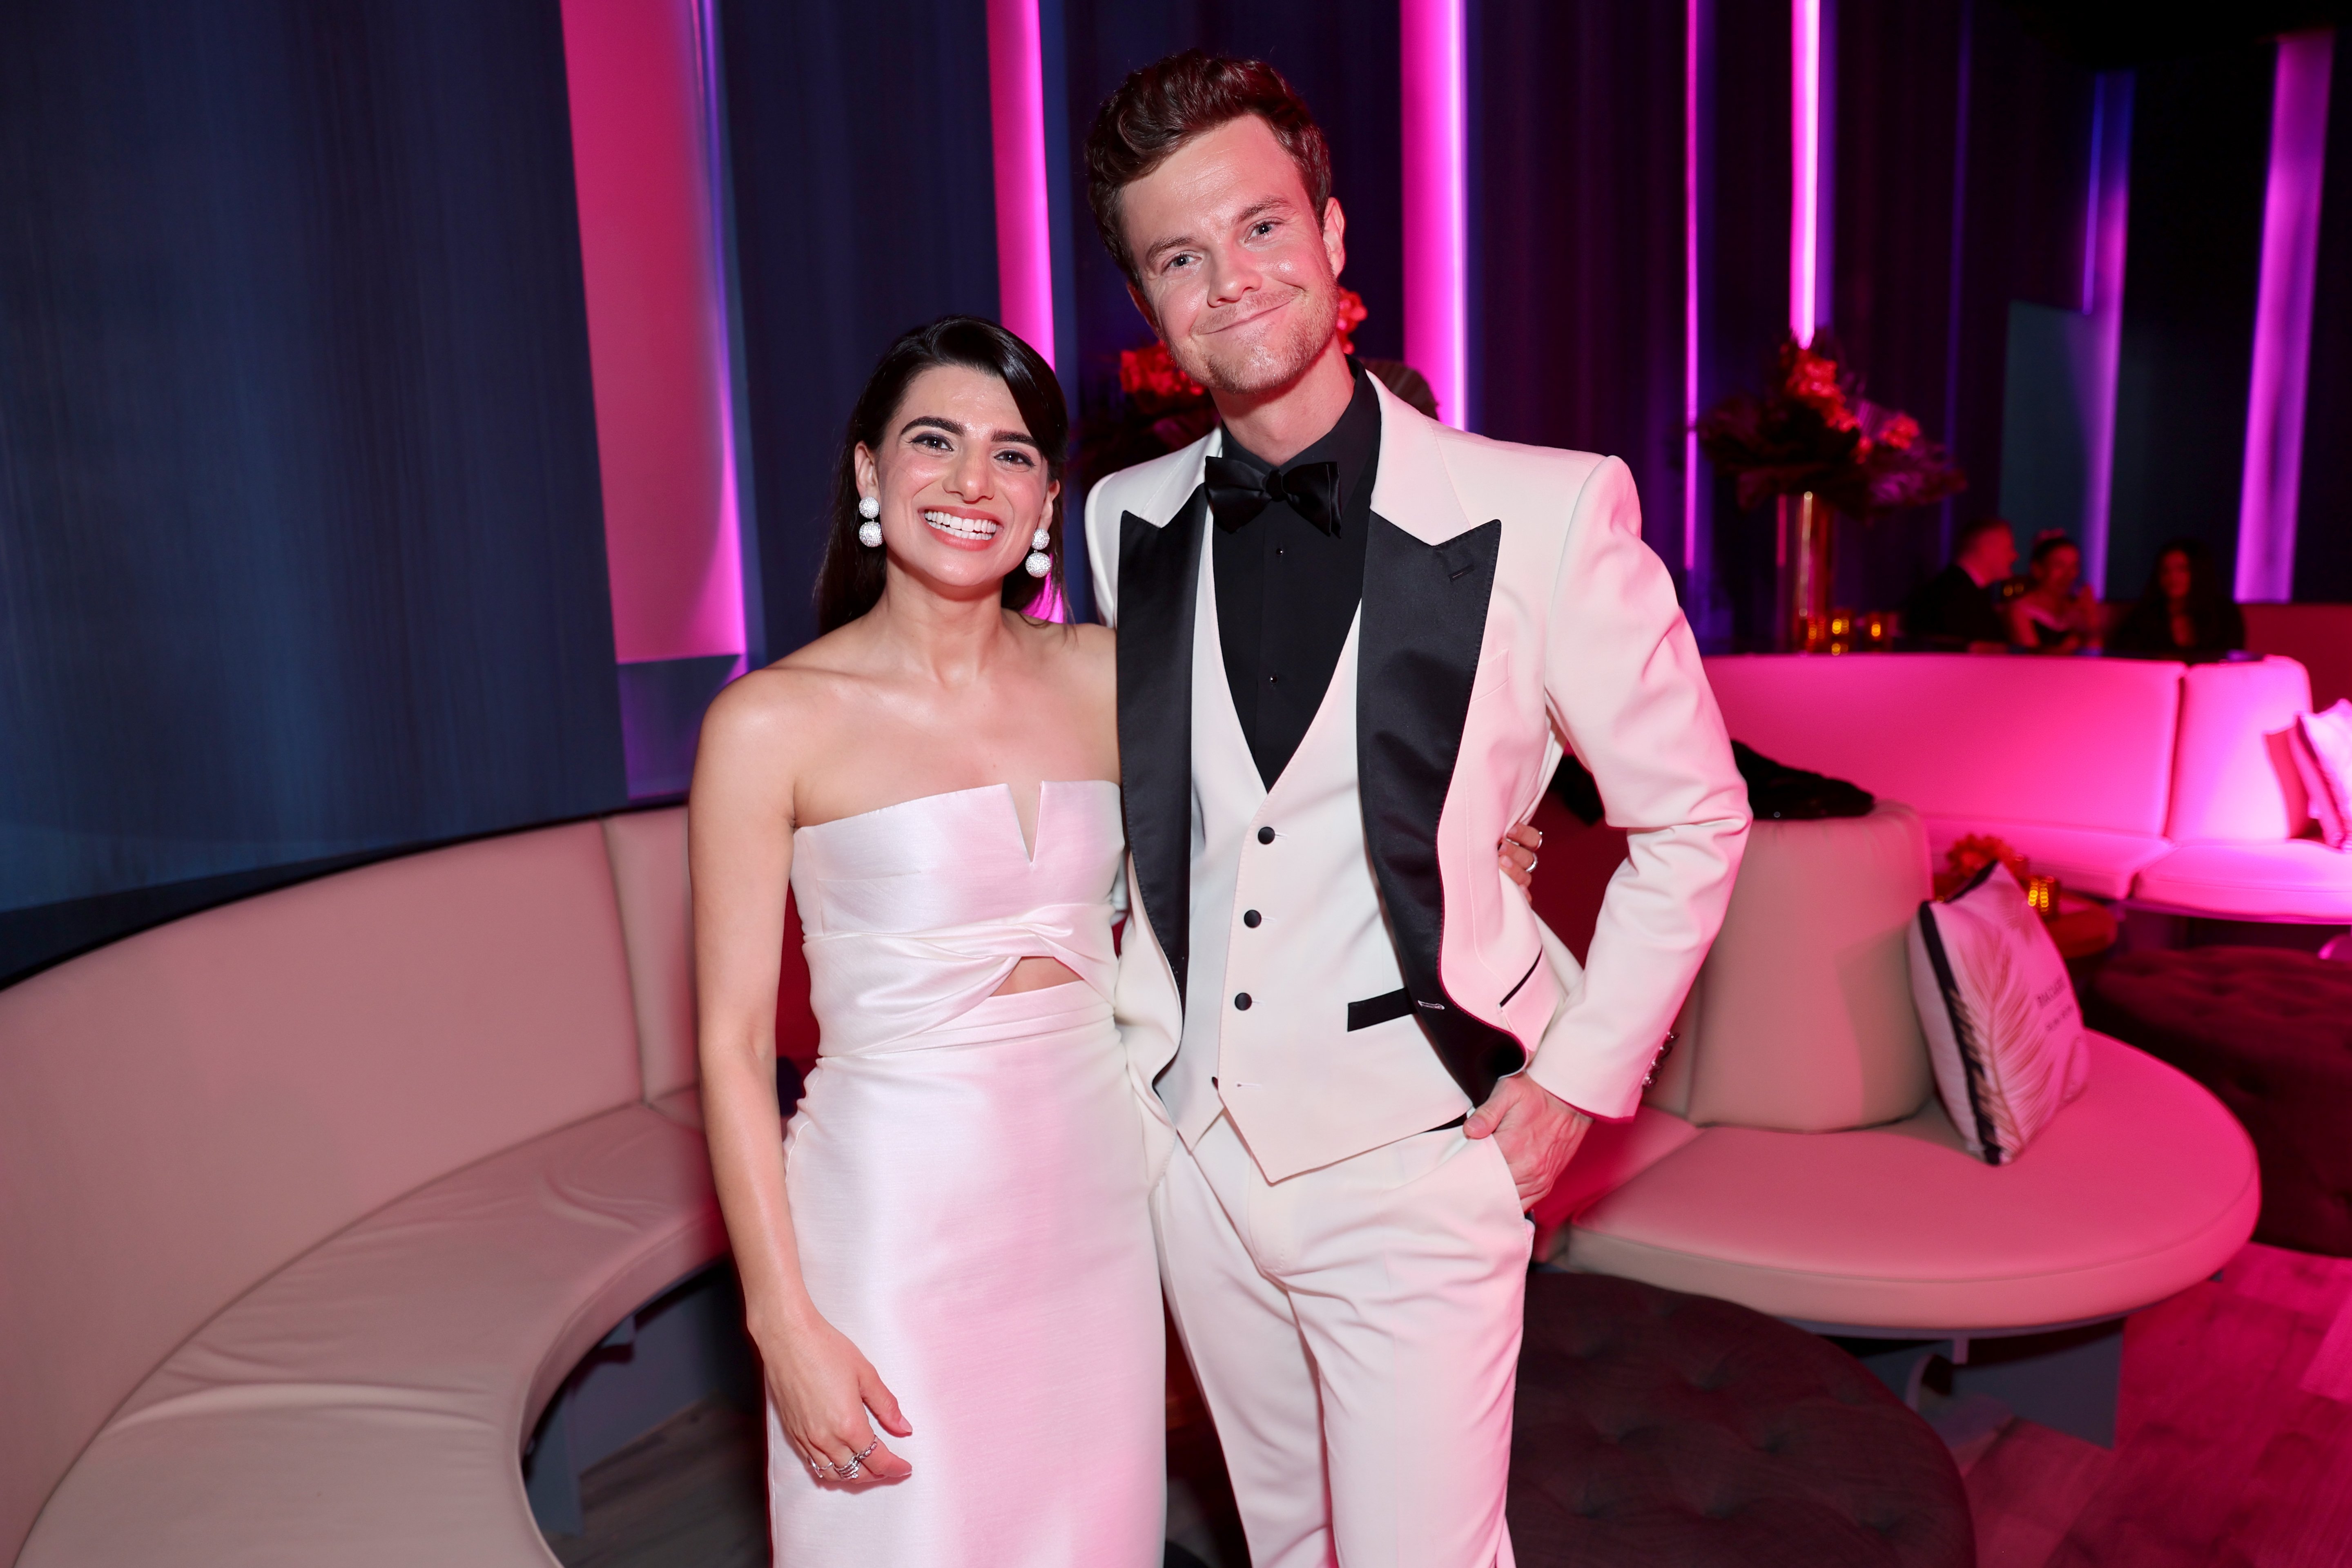 Claudia Doumit and Jack Quaid attend the 2022 Vanity Fair Oscar Party at Wallis Annenberg Center for the Performing Arts, on March 27, 2022, in Beverly Hills, California. | Source: Getty Images